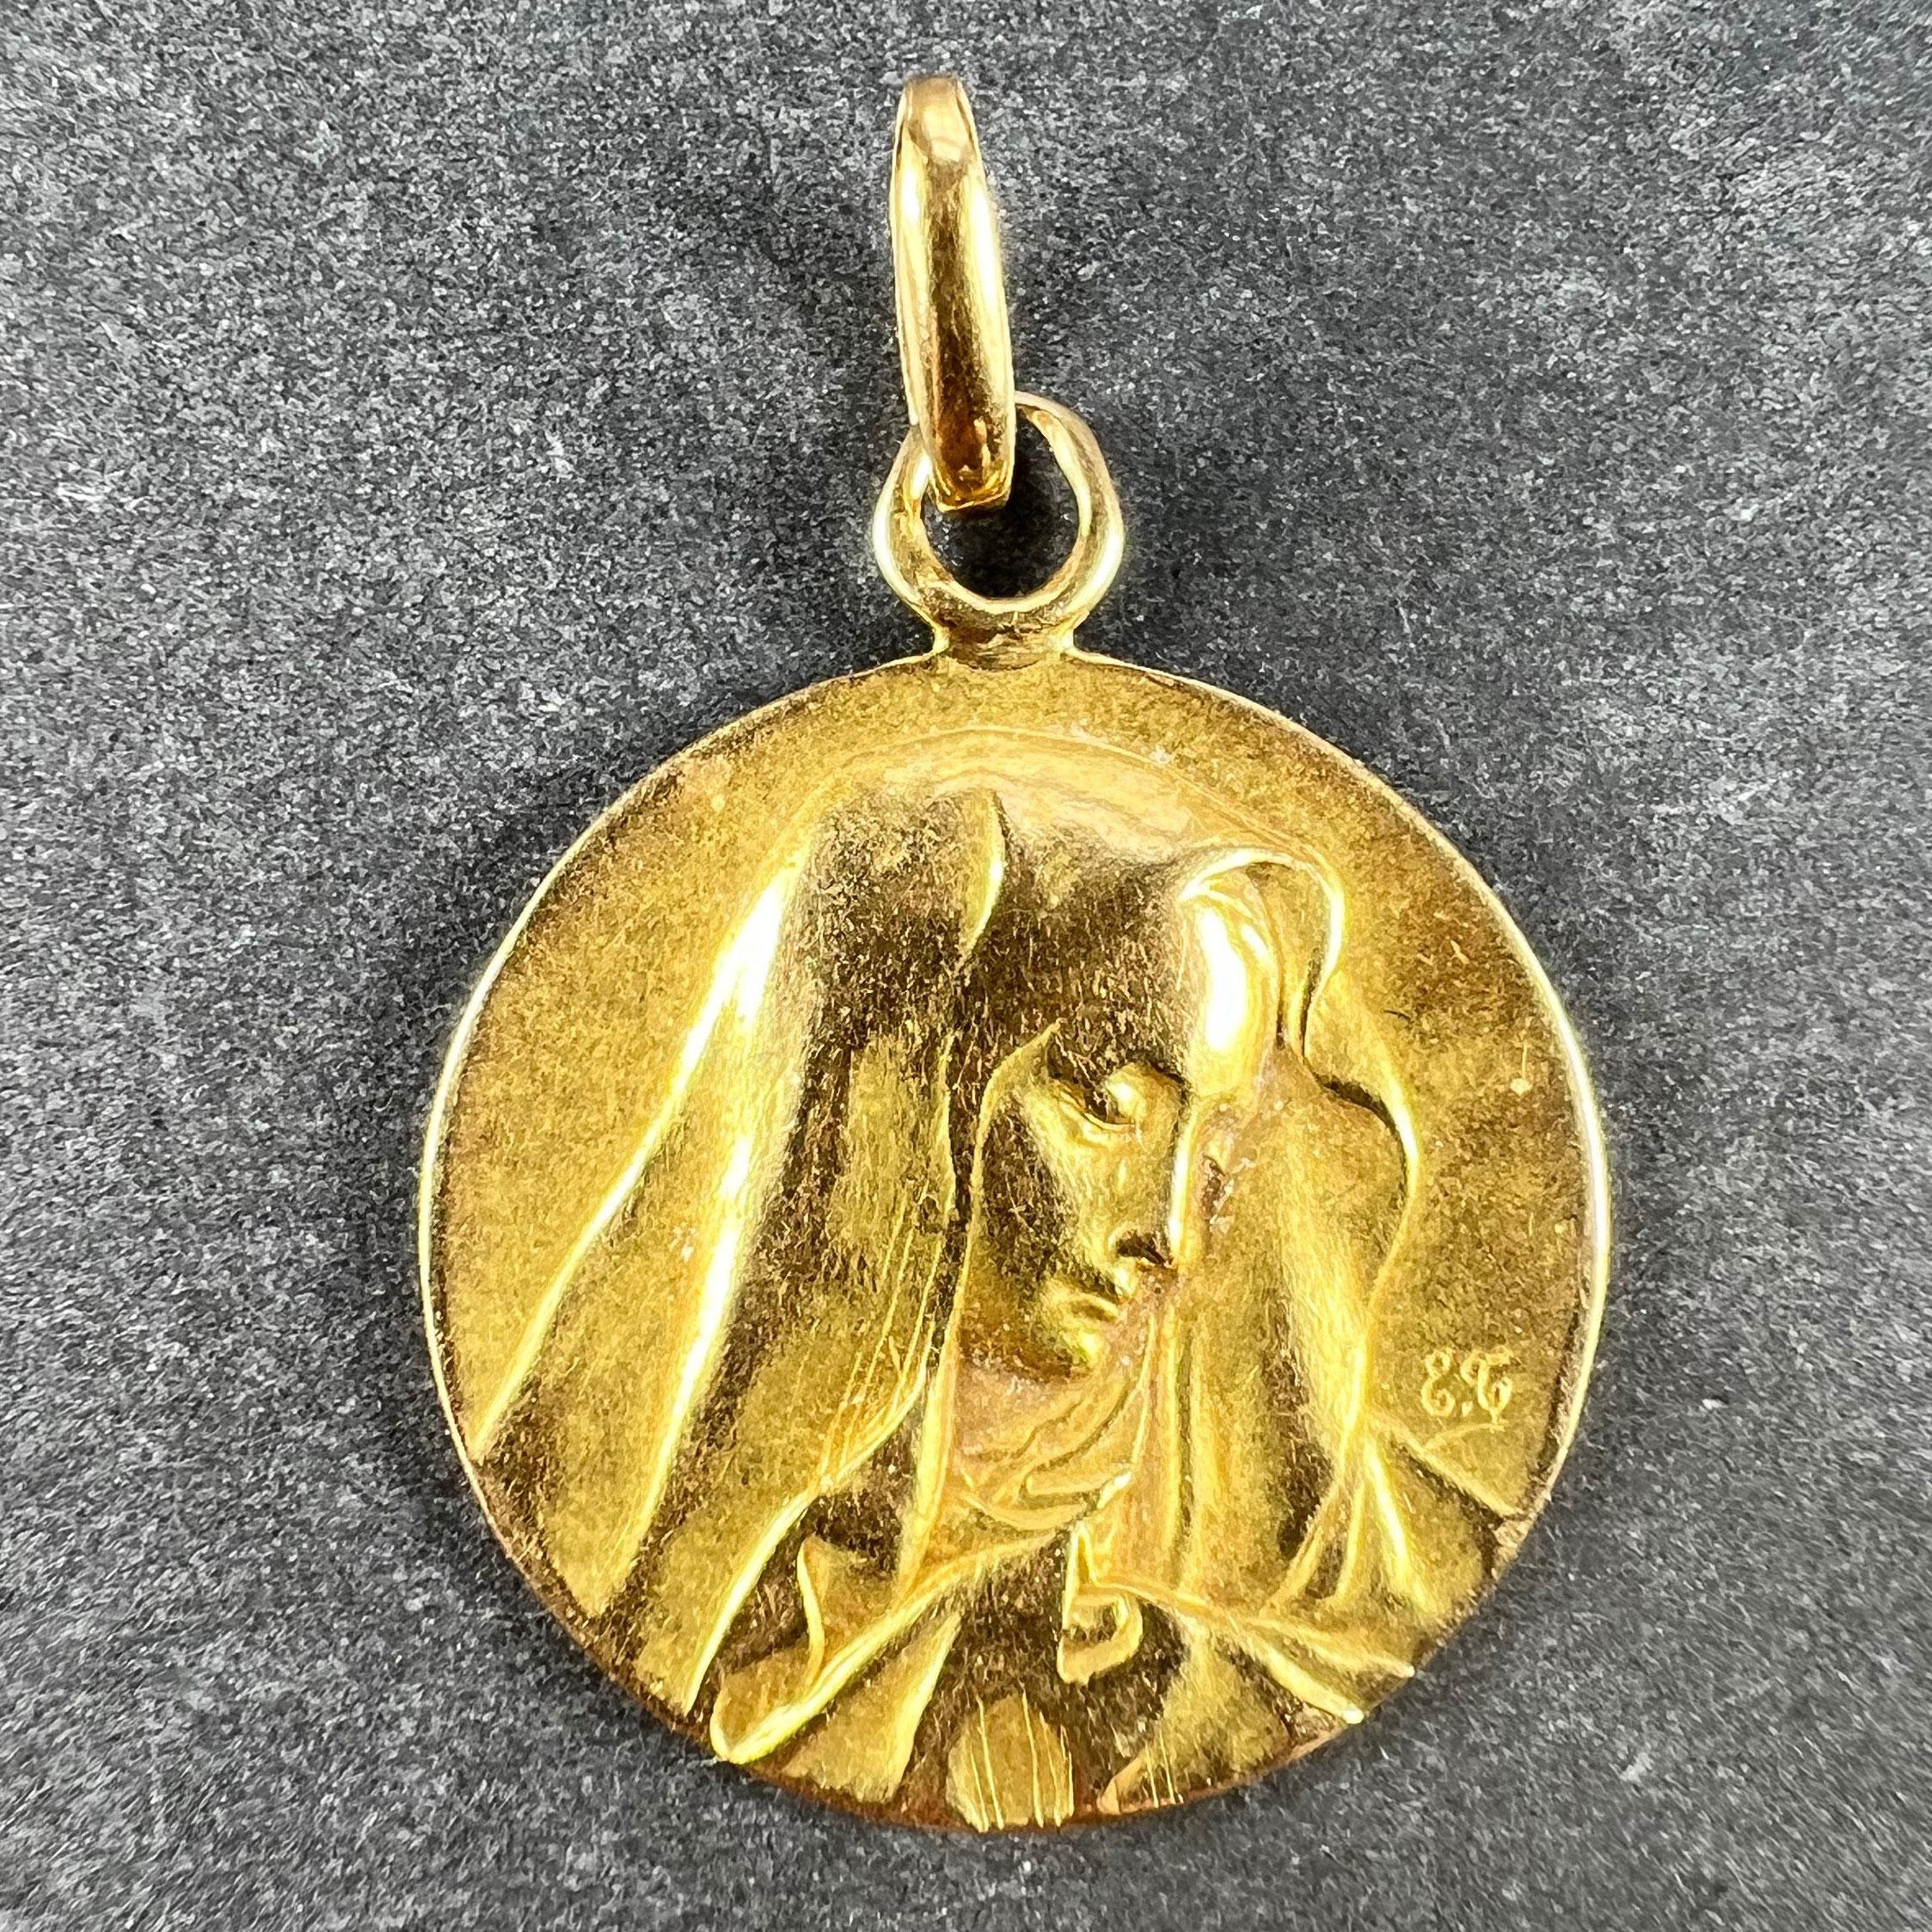 A French 18 karat (18K) yellow gold charm pendant designed as a round medal depicting the Virgin Mary in a veil; engraved Aline to the reverse and dated 26 Mars 1913. Unmarked but tested for 18 karat gold.

Dimensions: 2.1 x 1.8 x 0.13 cm (not